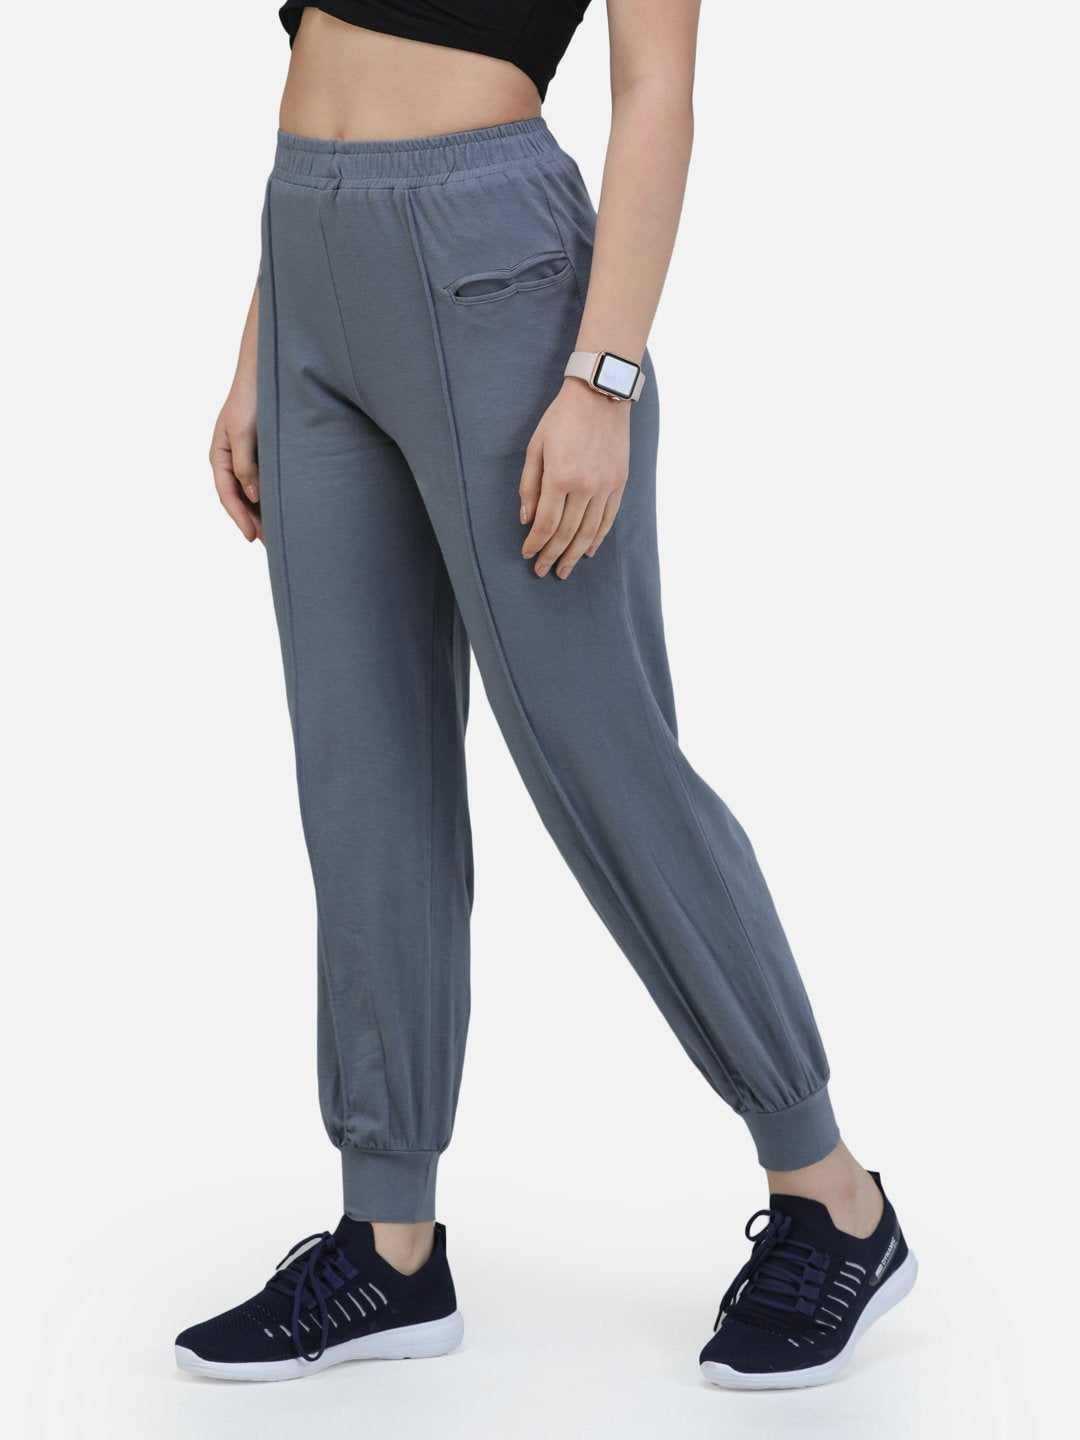 SCORPIUS GREY TRACKPANT WITH FRONT POCKET DESIGN